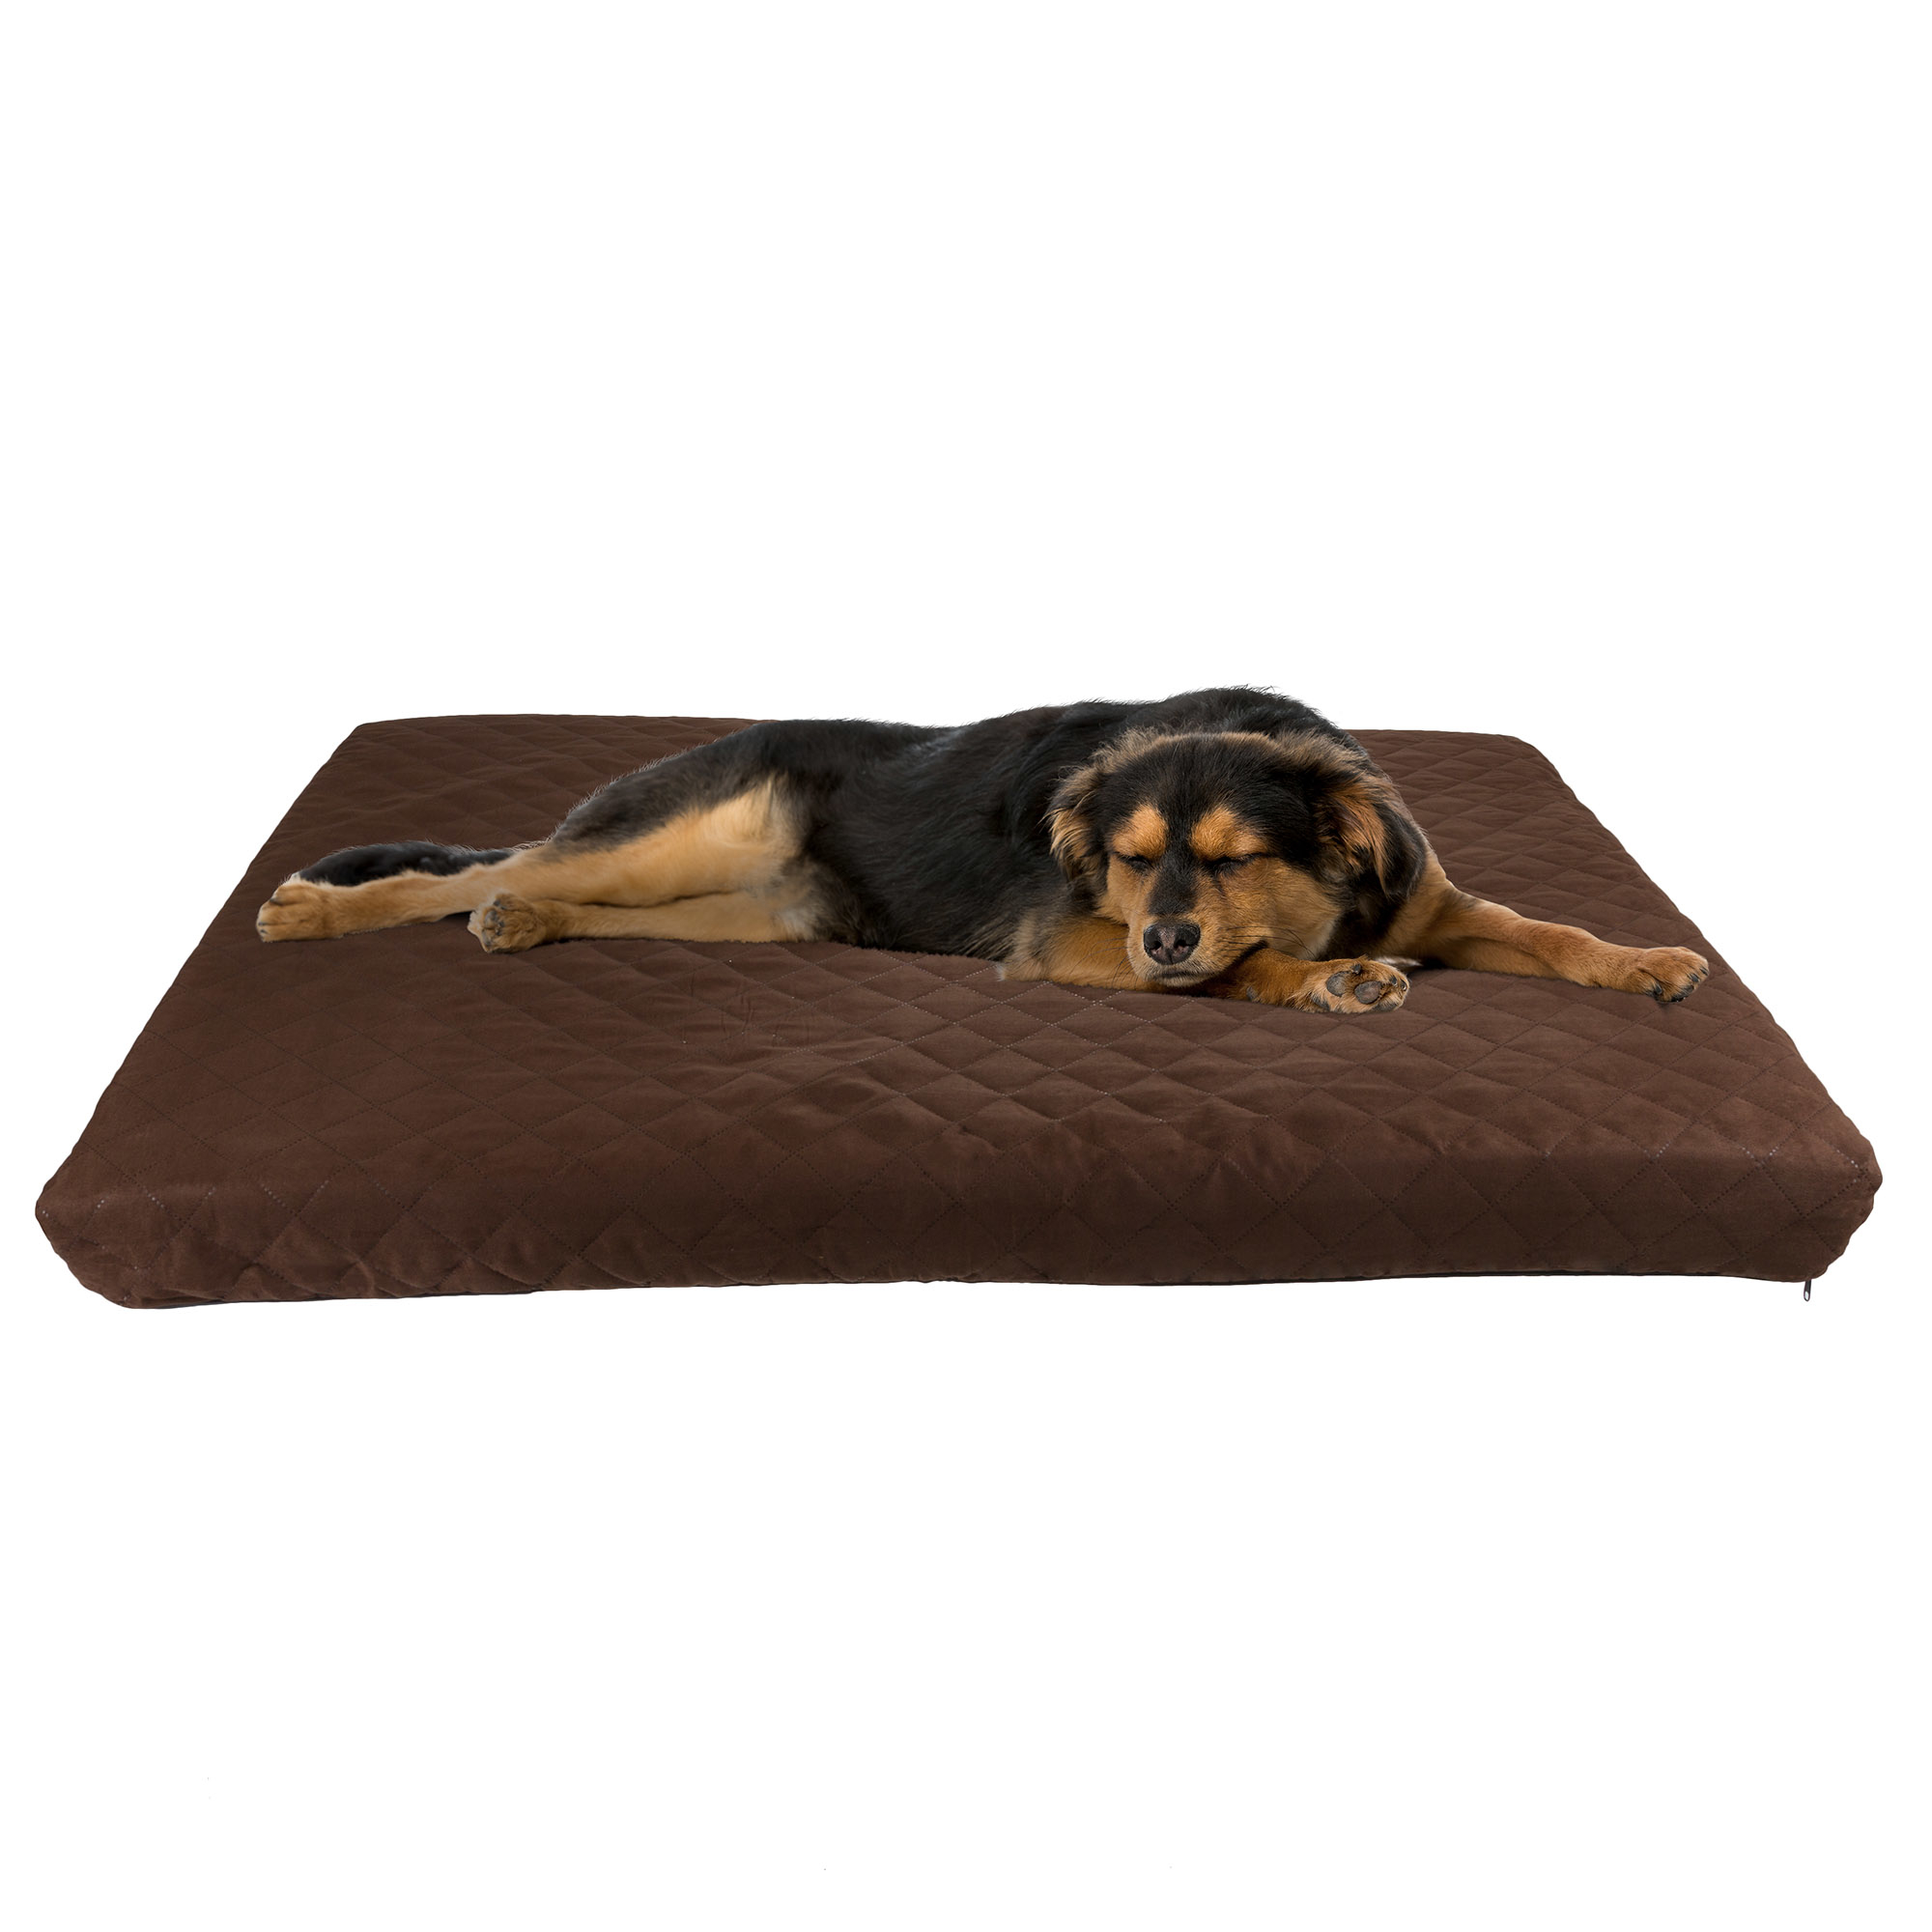 Waterproof Indoor Outdoor Memory Foam Orthopedic Large XL Pet Dog Bed Removable Cover 35 X 44 Inches